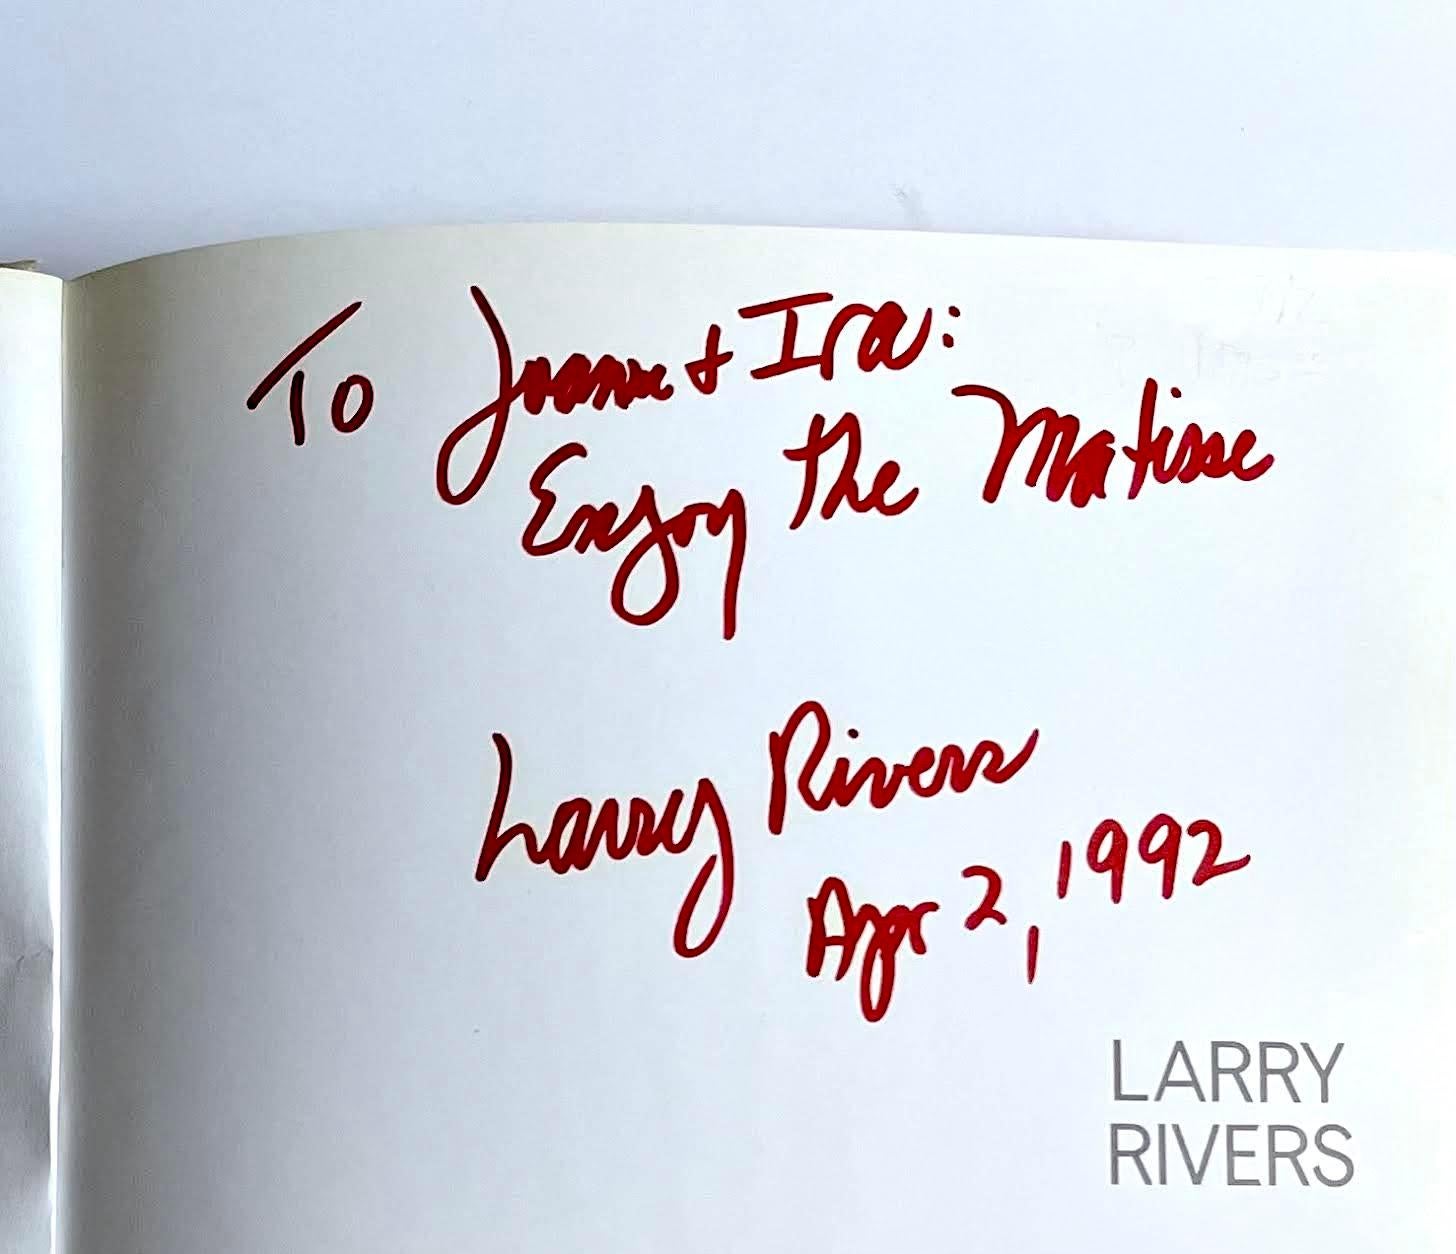 Larry Rivers
LARRY RIVERS (hand signed and inscribed first edition book), 1989
Hardback monograph with a dust jacket (hand signed and inscribed 